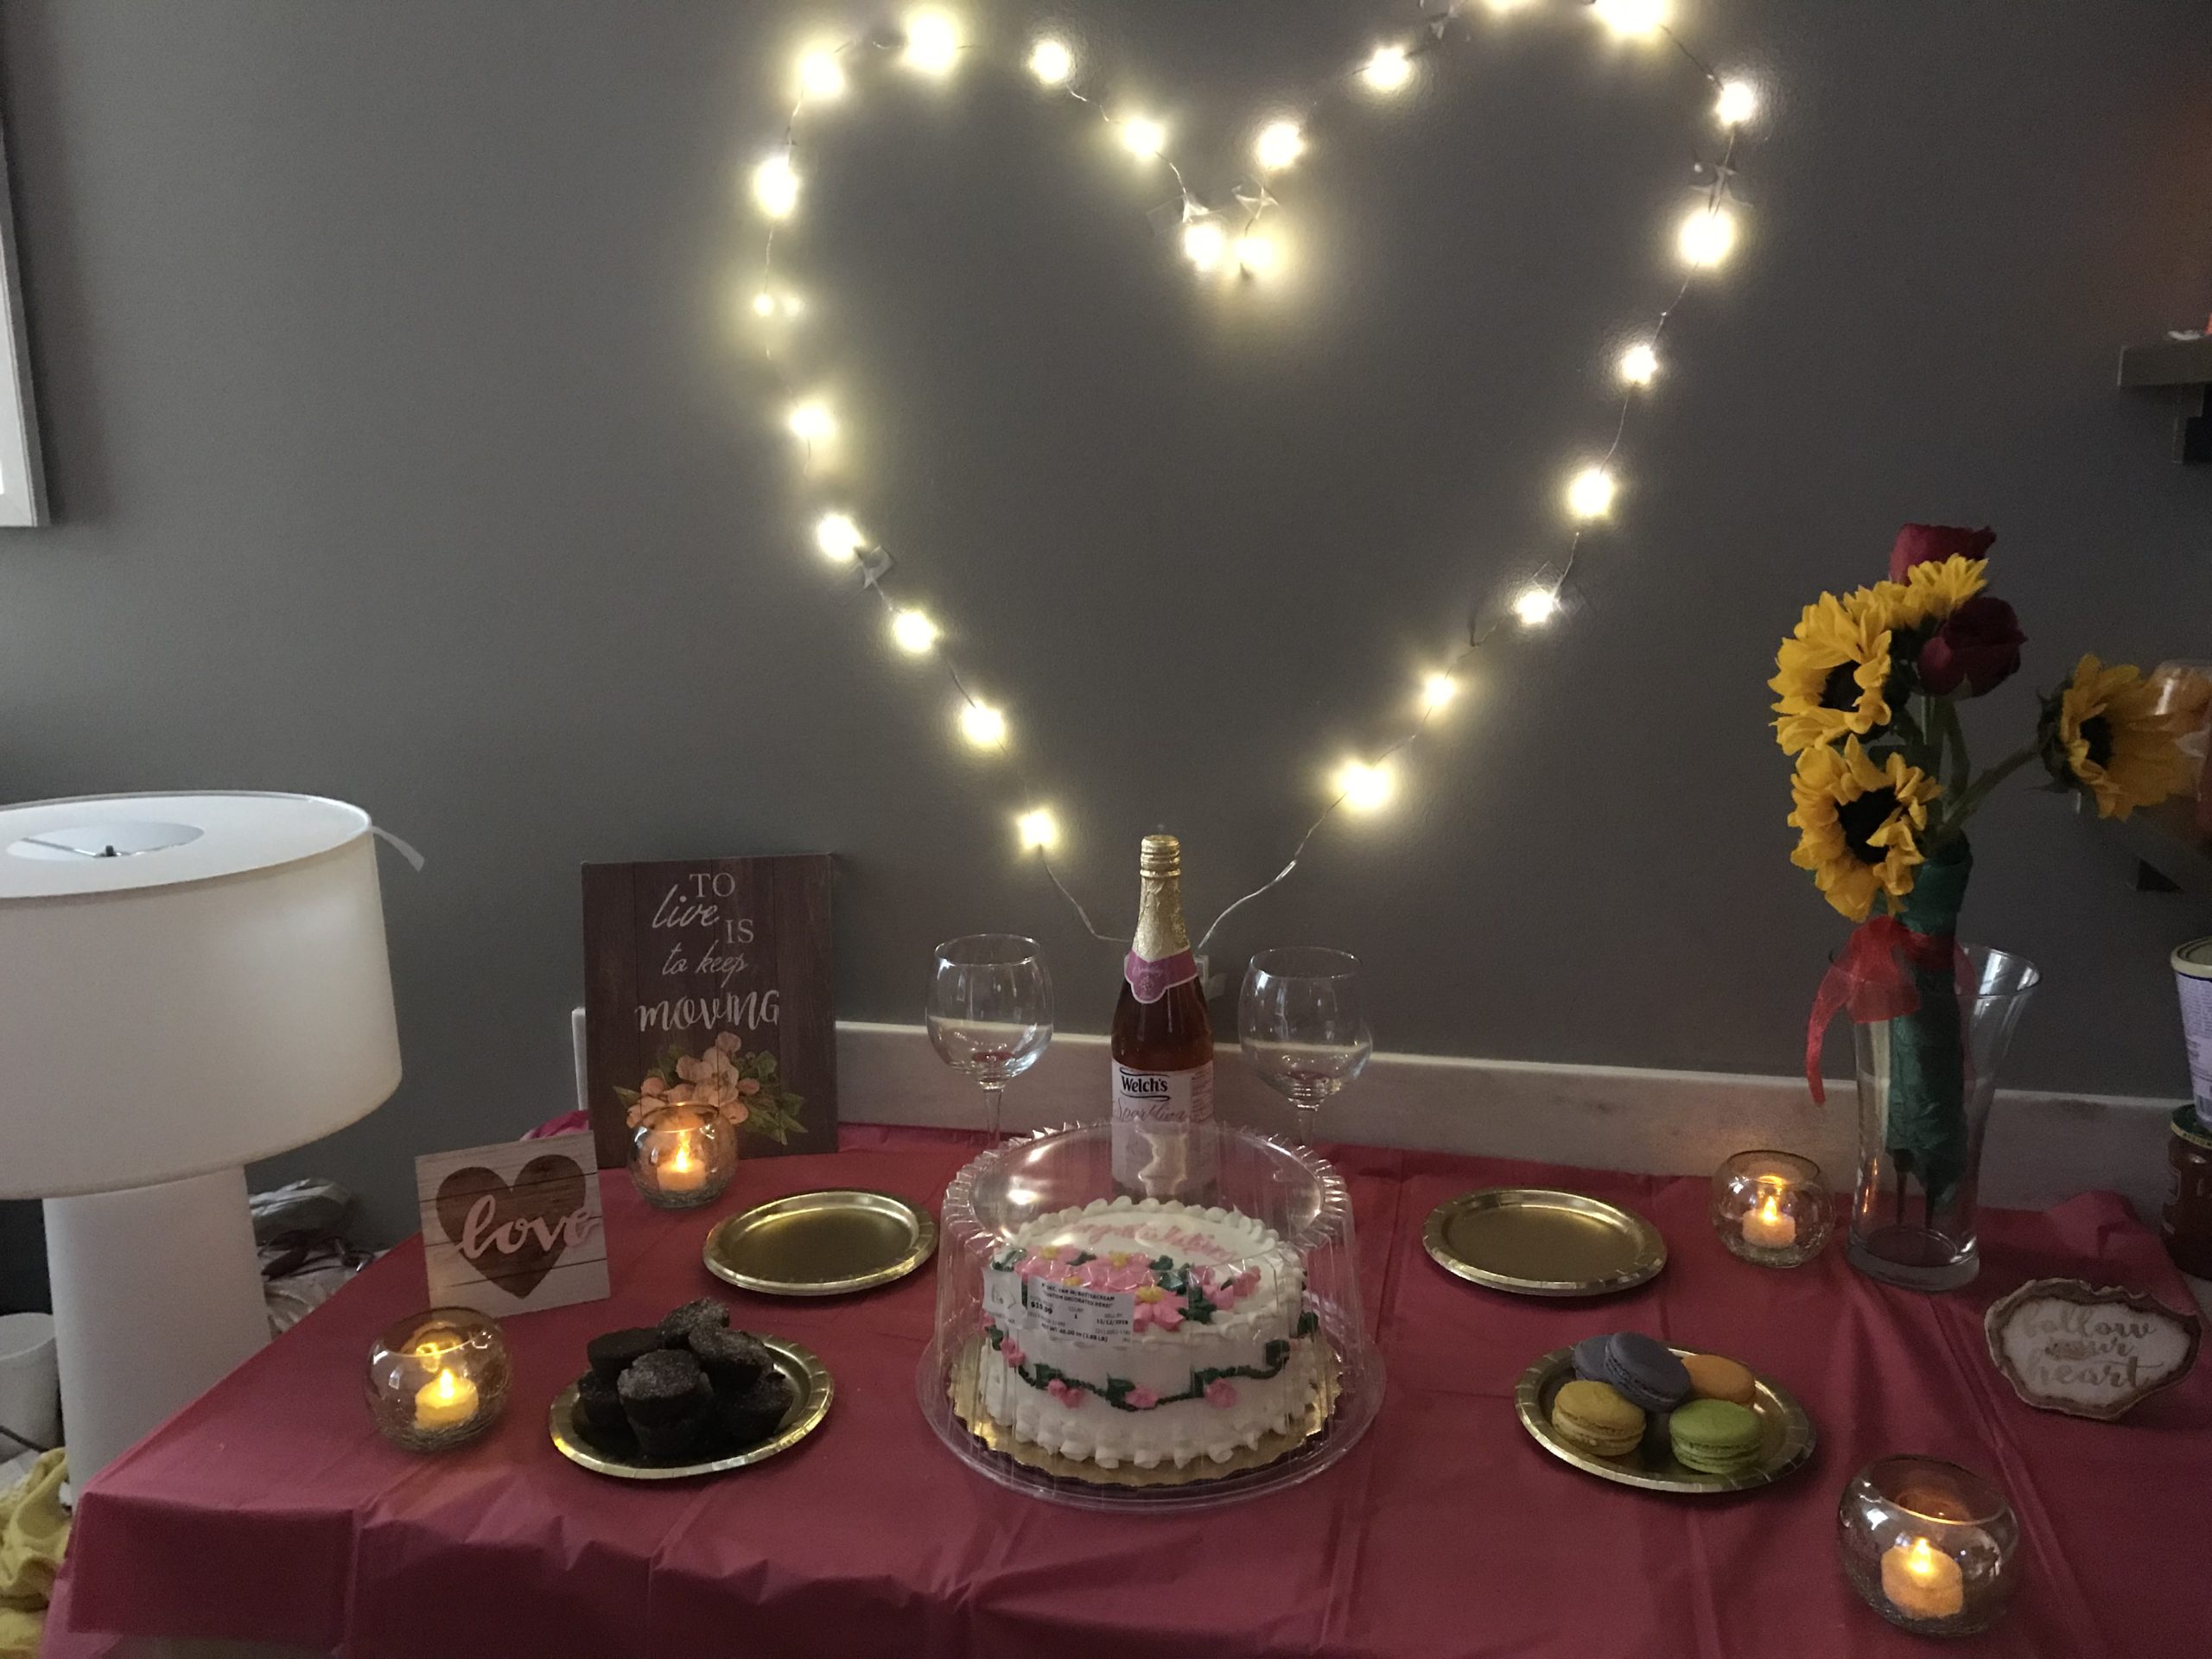 A string of lights making a heart shape behind a table with flowers and desserts